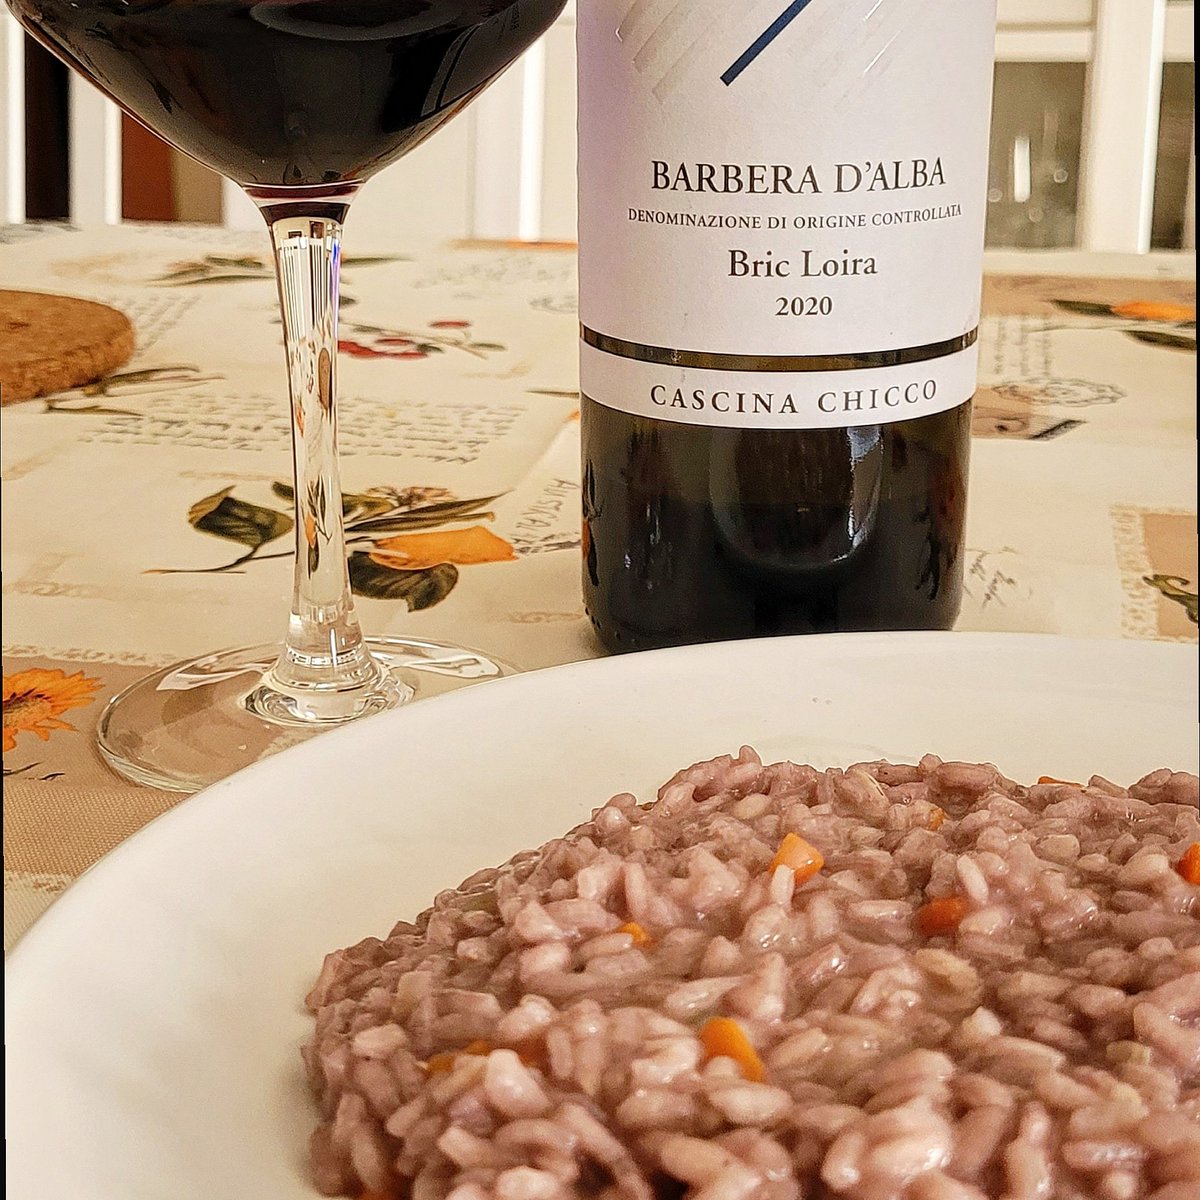 Hello #winelover 🍷
We have an idea for your today's lunch 😉
#Barbera in the dish and in the glass 😍
What do you think? 😎
.
#cascinachicco #cascinachiccowine #barberadalba #bricloira #cru #castellinaldo #Roero #Langhe #UNESCO #winepairing #winetasting #home #lunch #risotto